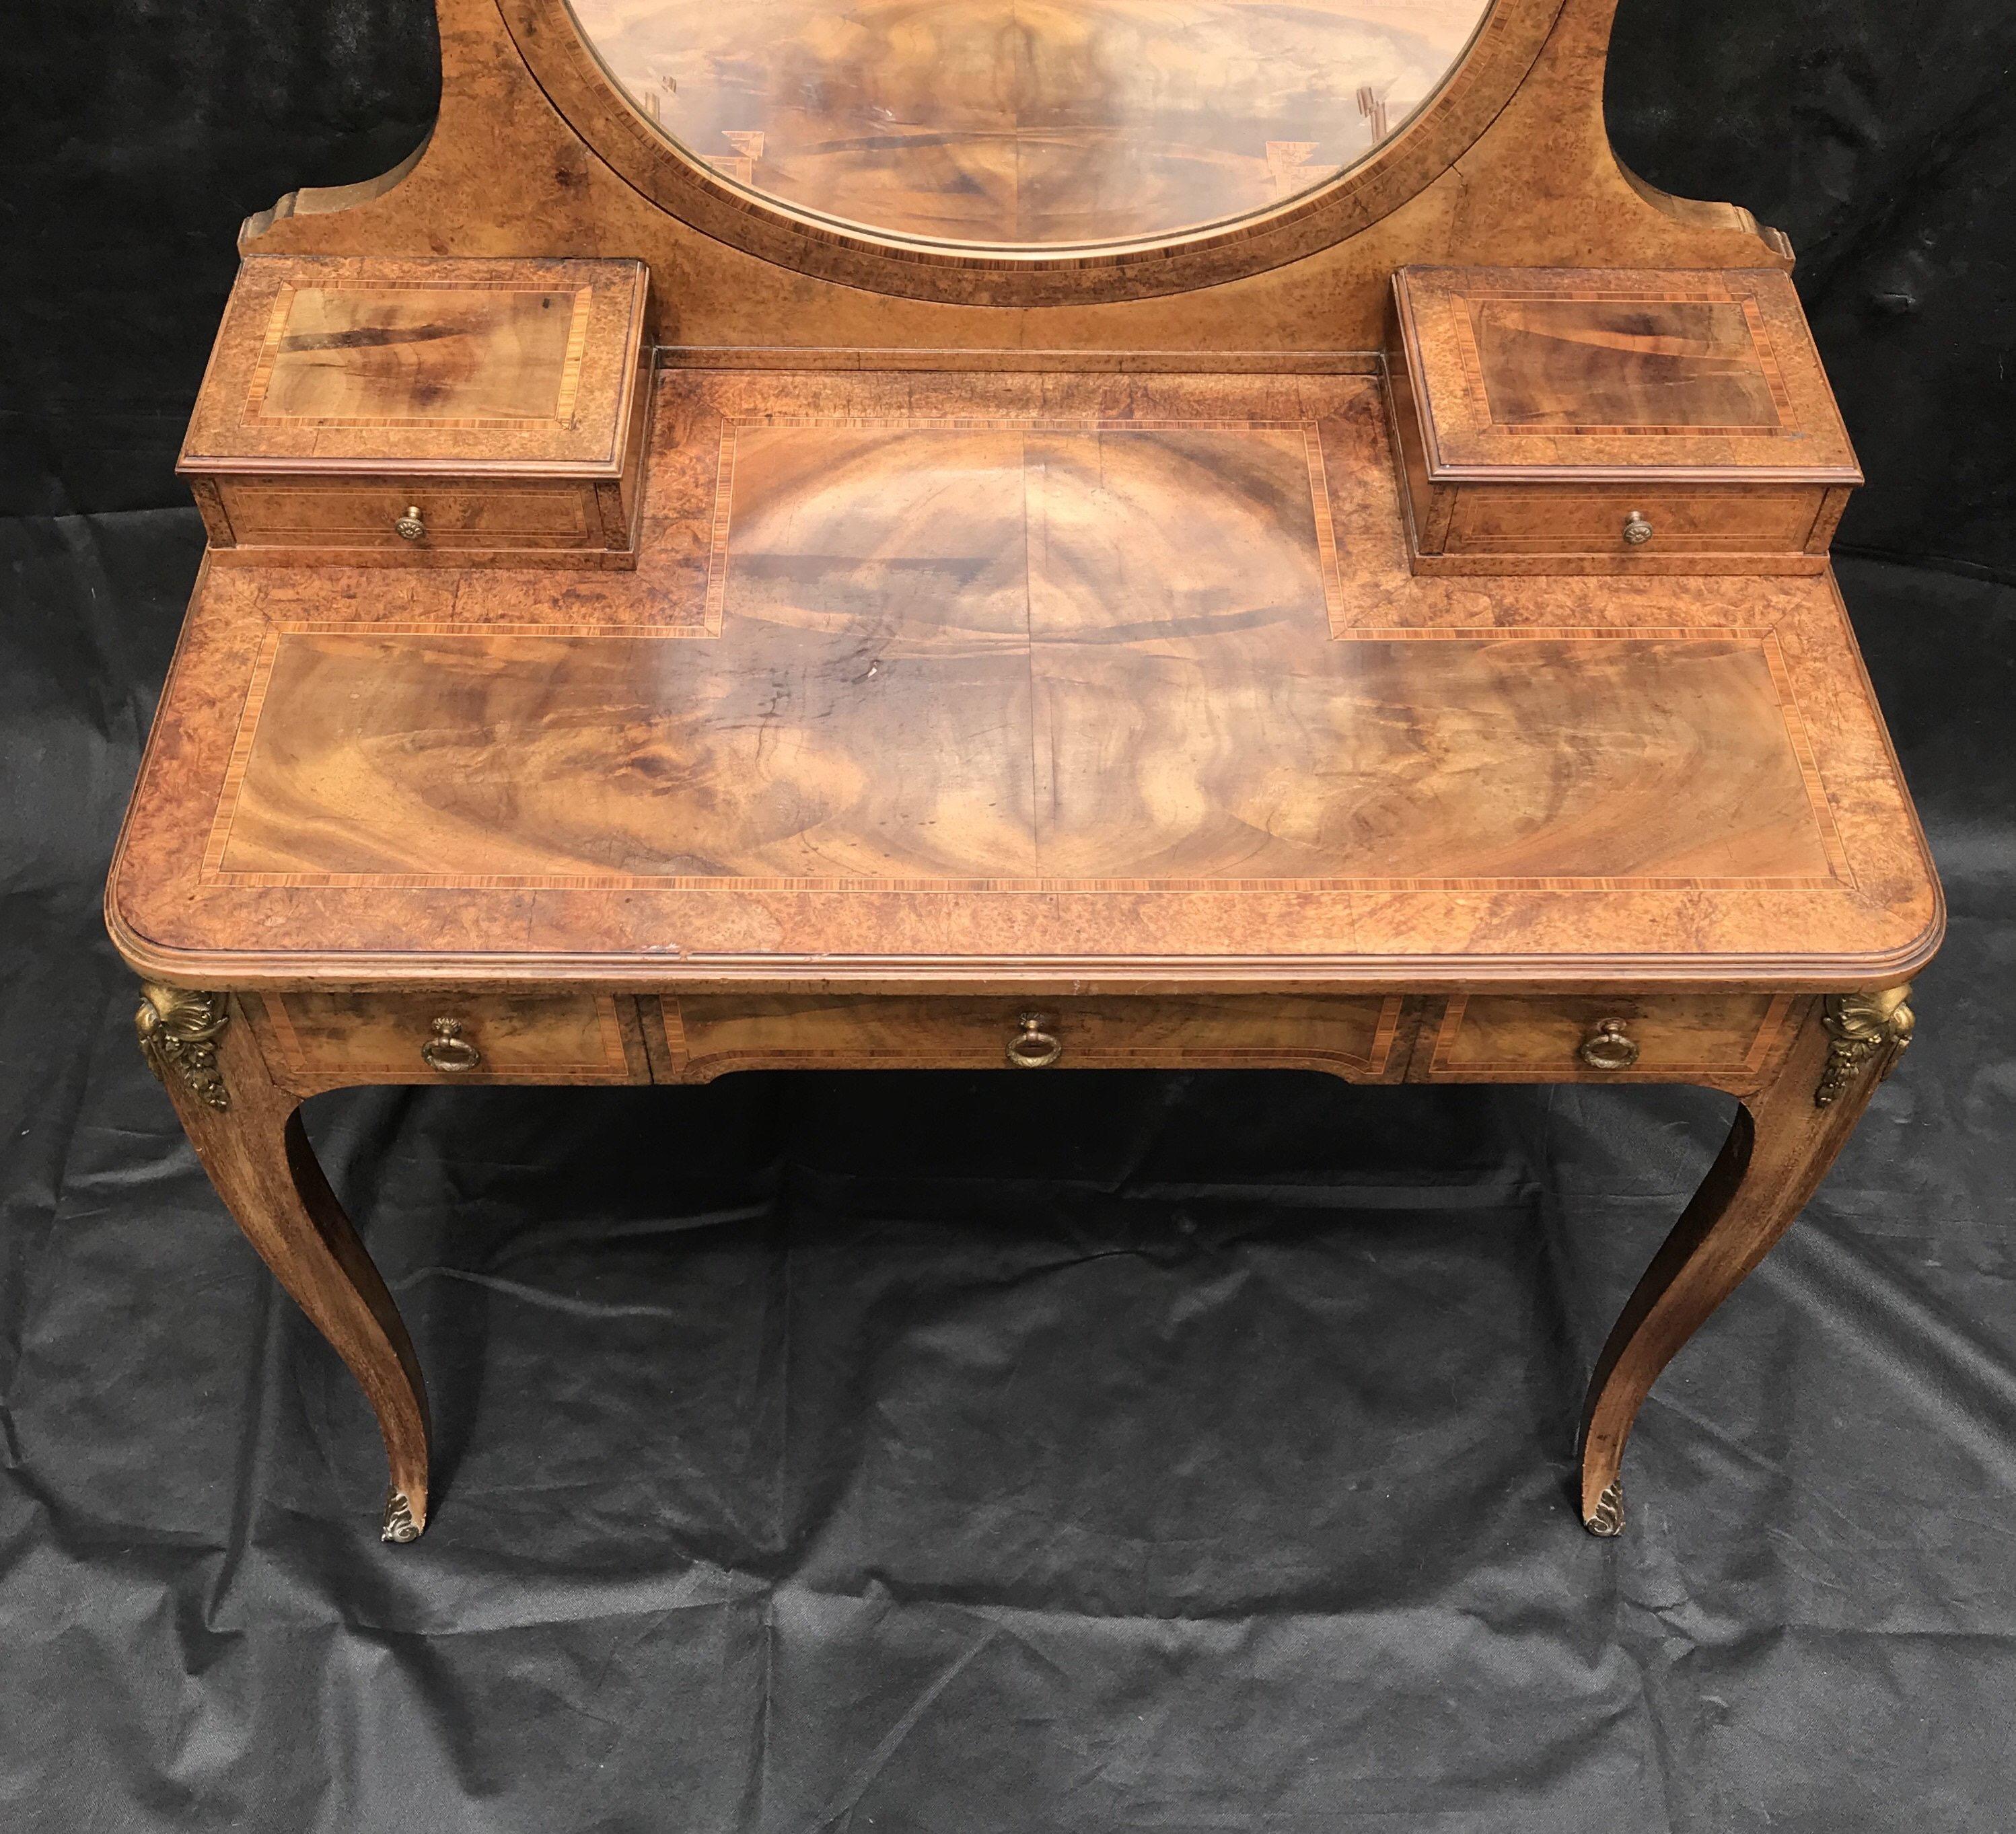 Bought outside Paris, a 19th century gorgeous antique inlaid walnut vanity having marquetry and faithful interpretation of the Louis XV style with three spacious drawers. A graceful oval shaped beveled vanity mirror tops this impeccable design,